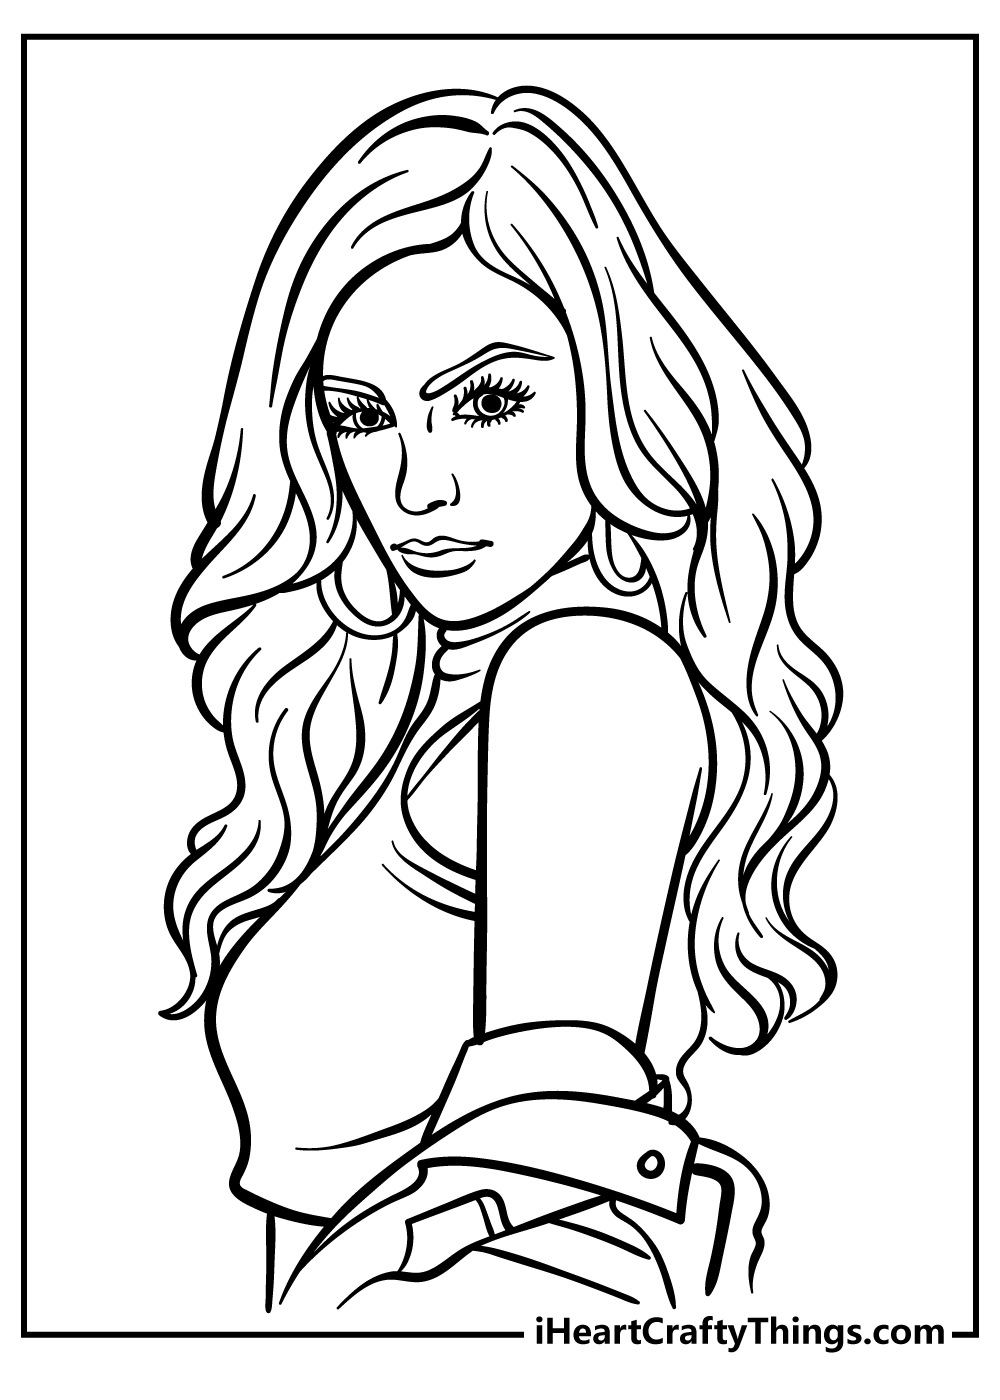 Coloring pages for teens free printables